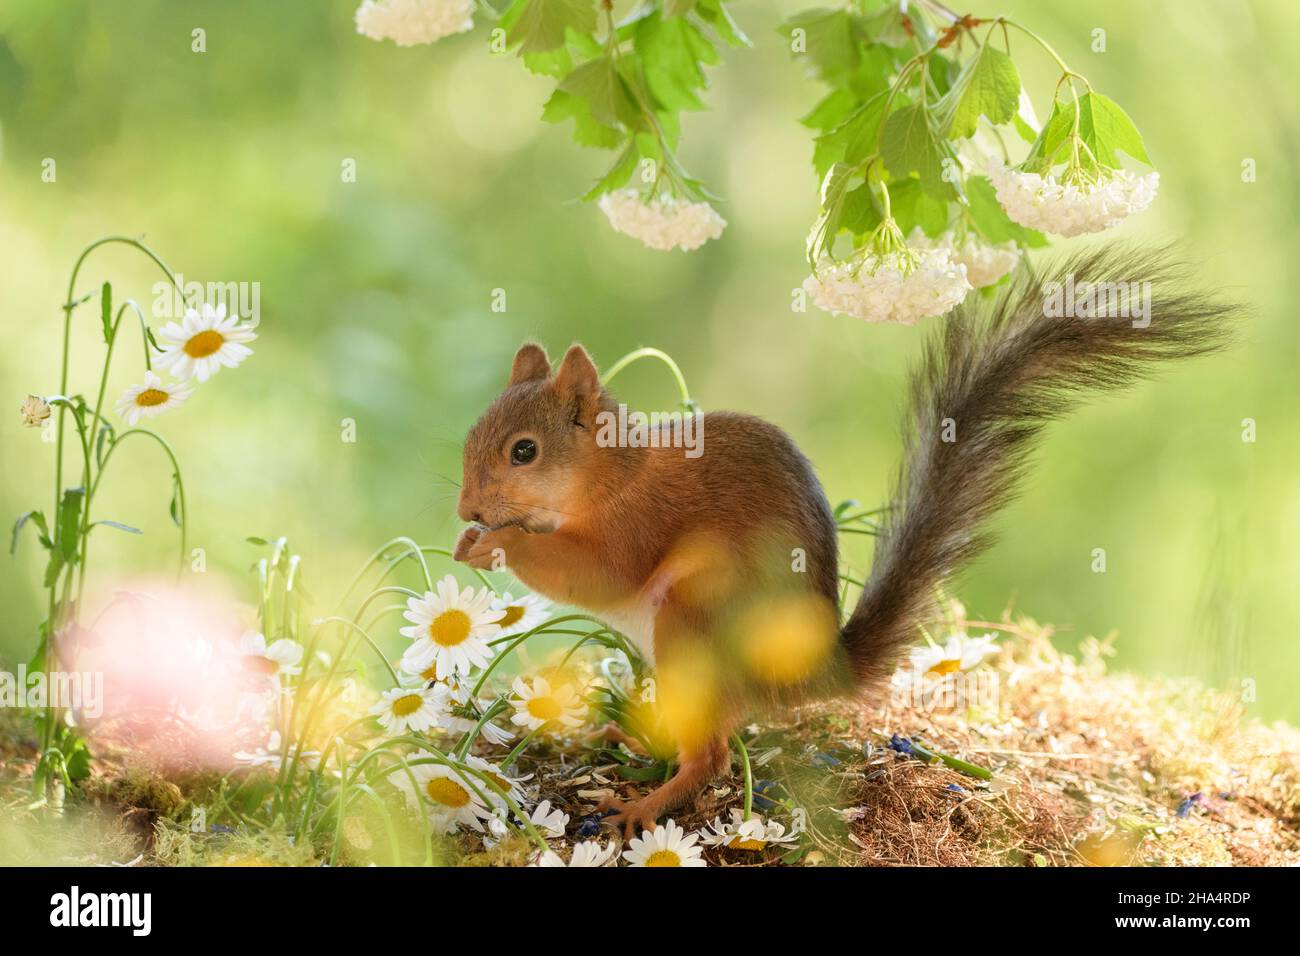 female red squirrel is standing between daisies and guelder rose flowers Stock Photo